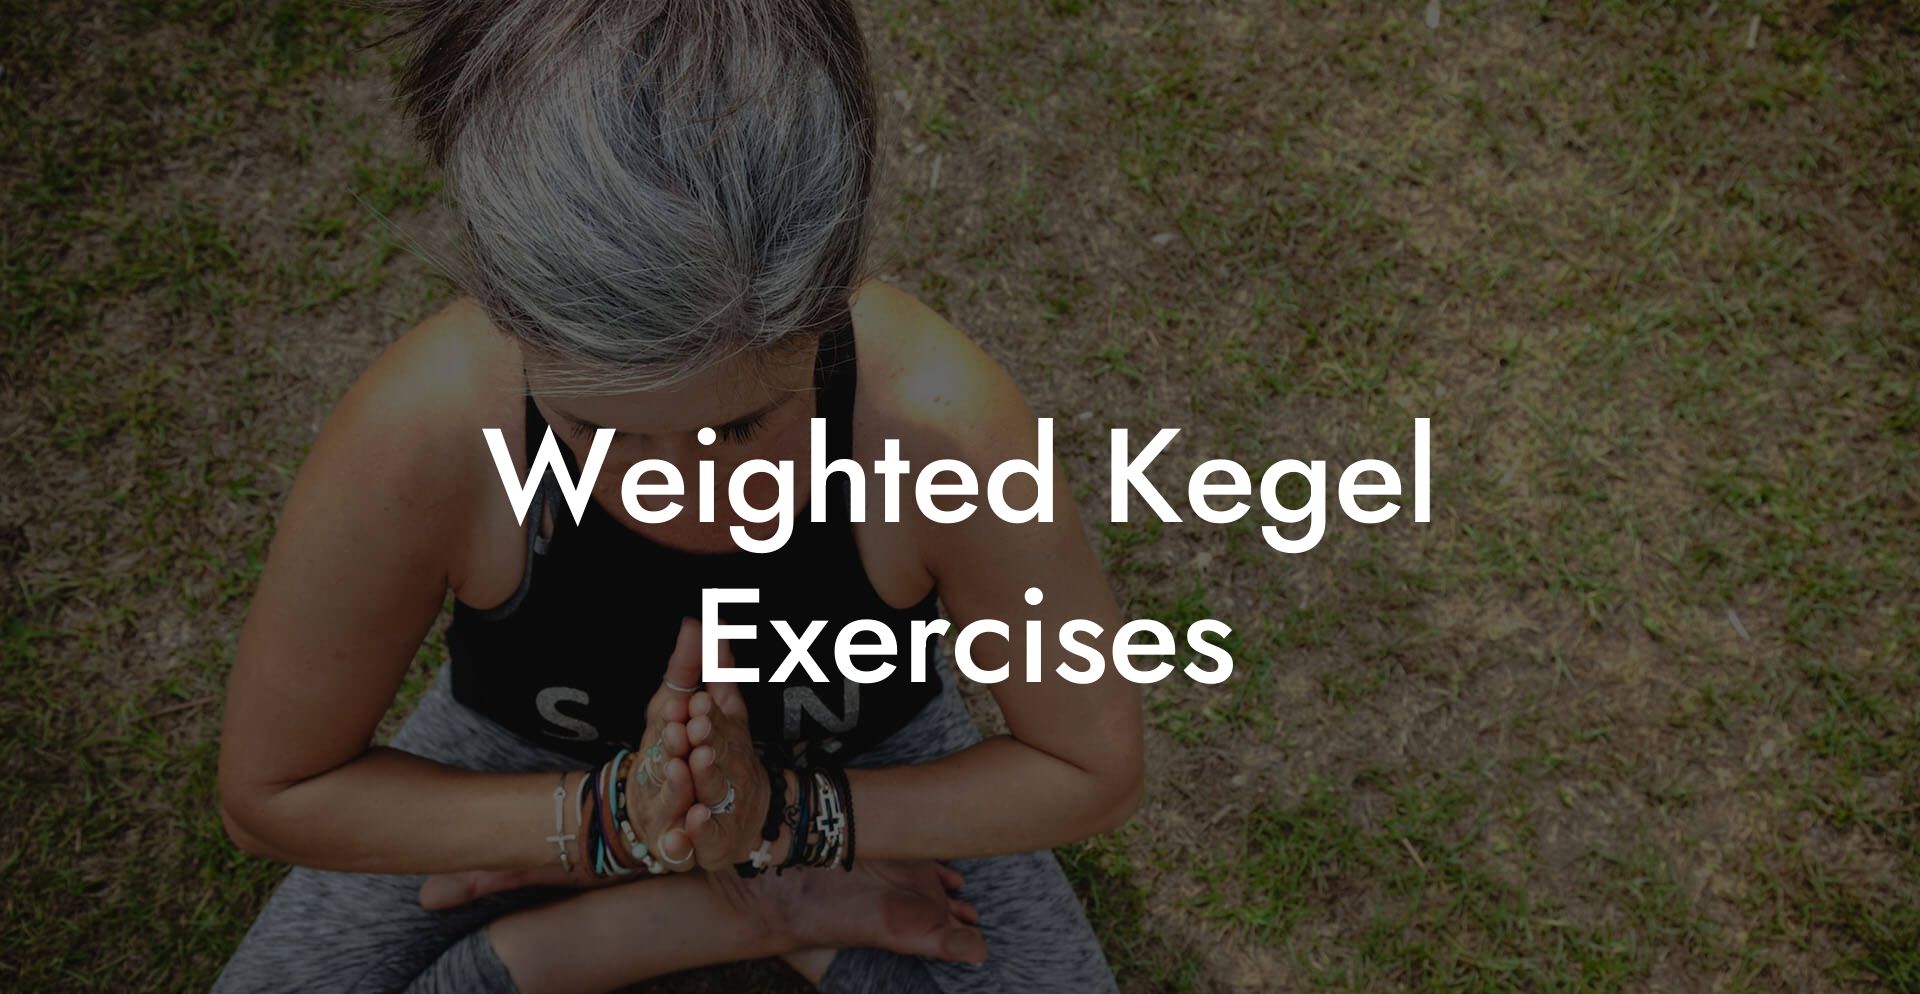 Weighted Kegel Exercises